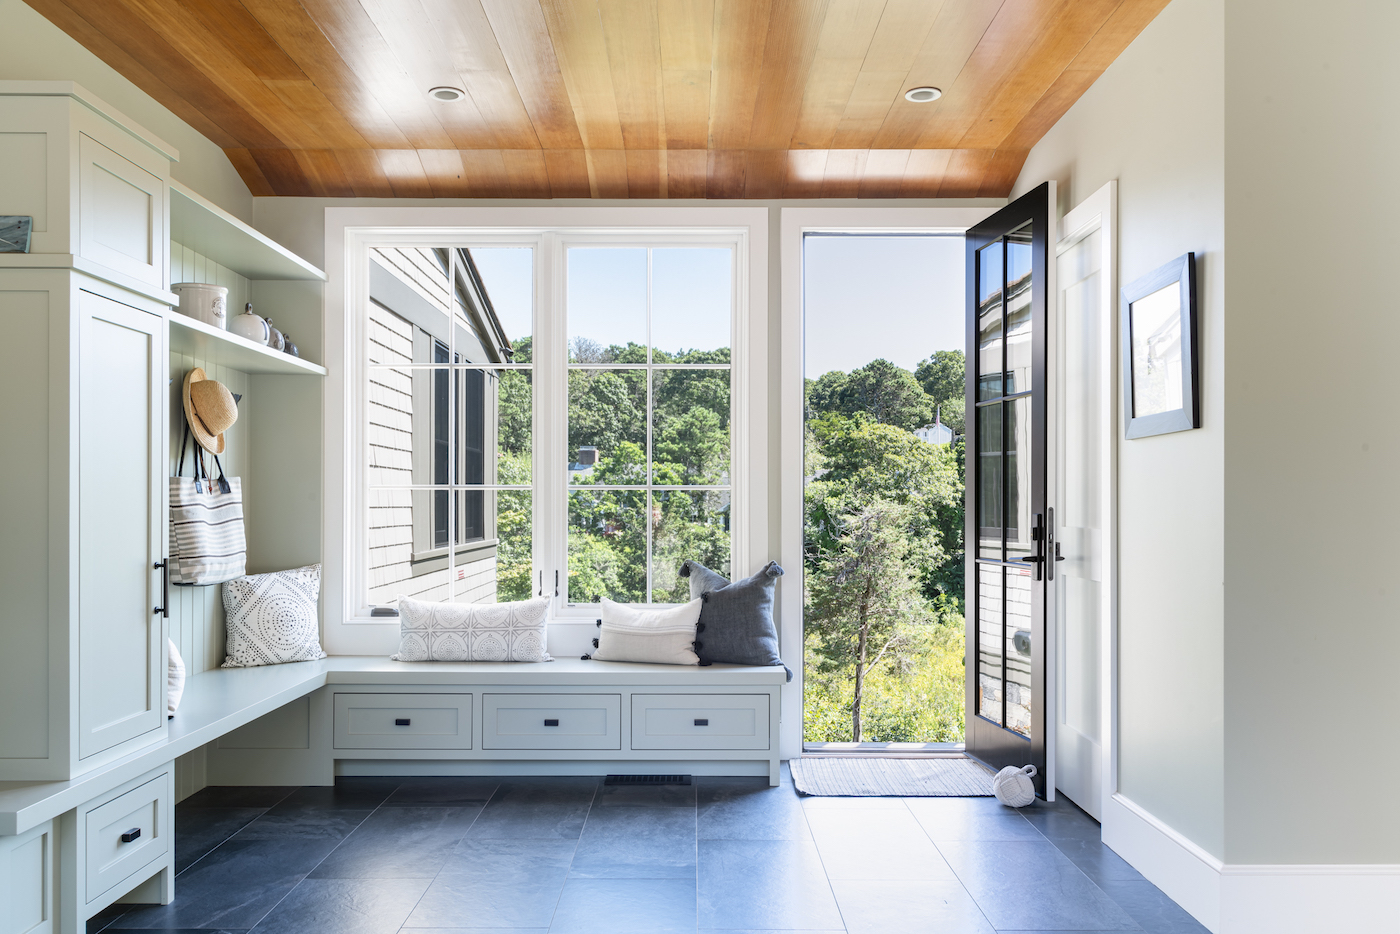 Mudroom, Chatham, Archwright Builders, Muldoon Architects